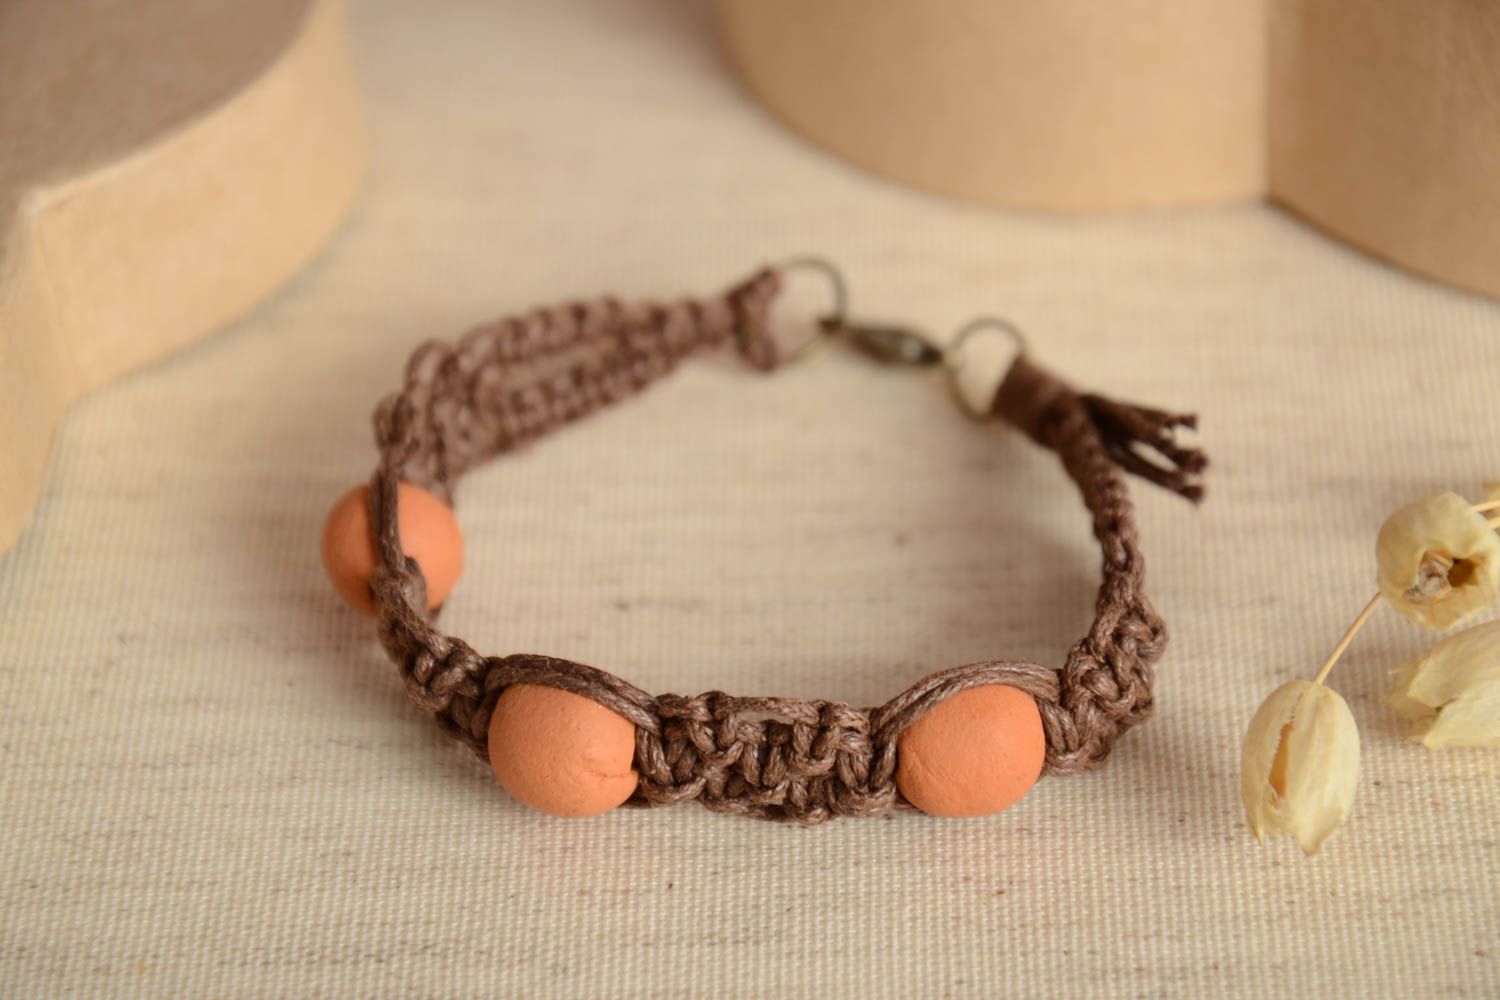 Handmade woven wax cord bracelet wrist bracelet with ceramic beads gifts for her photo 2